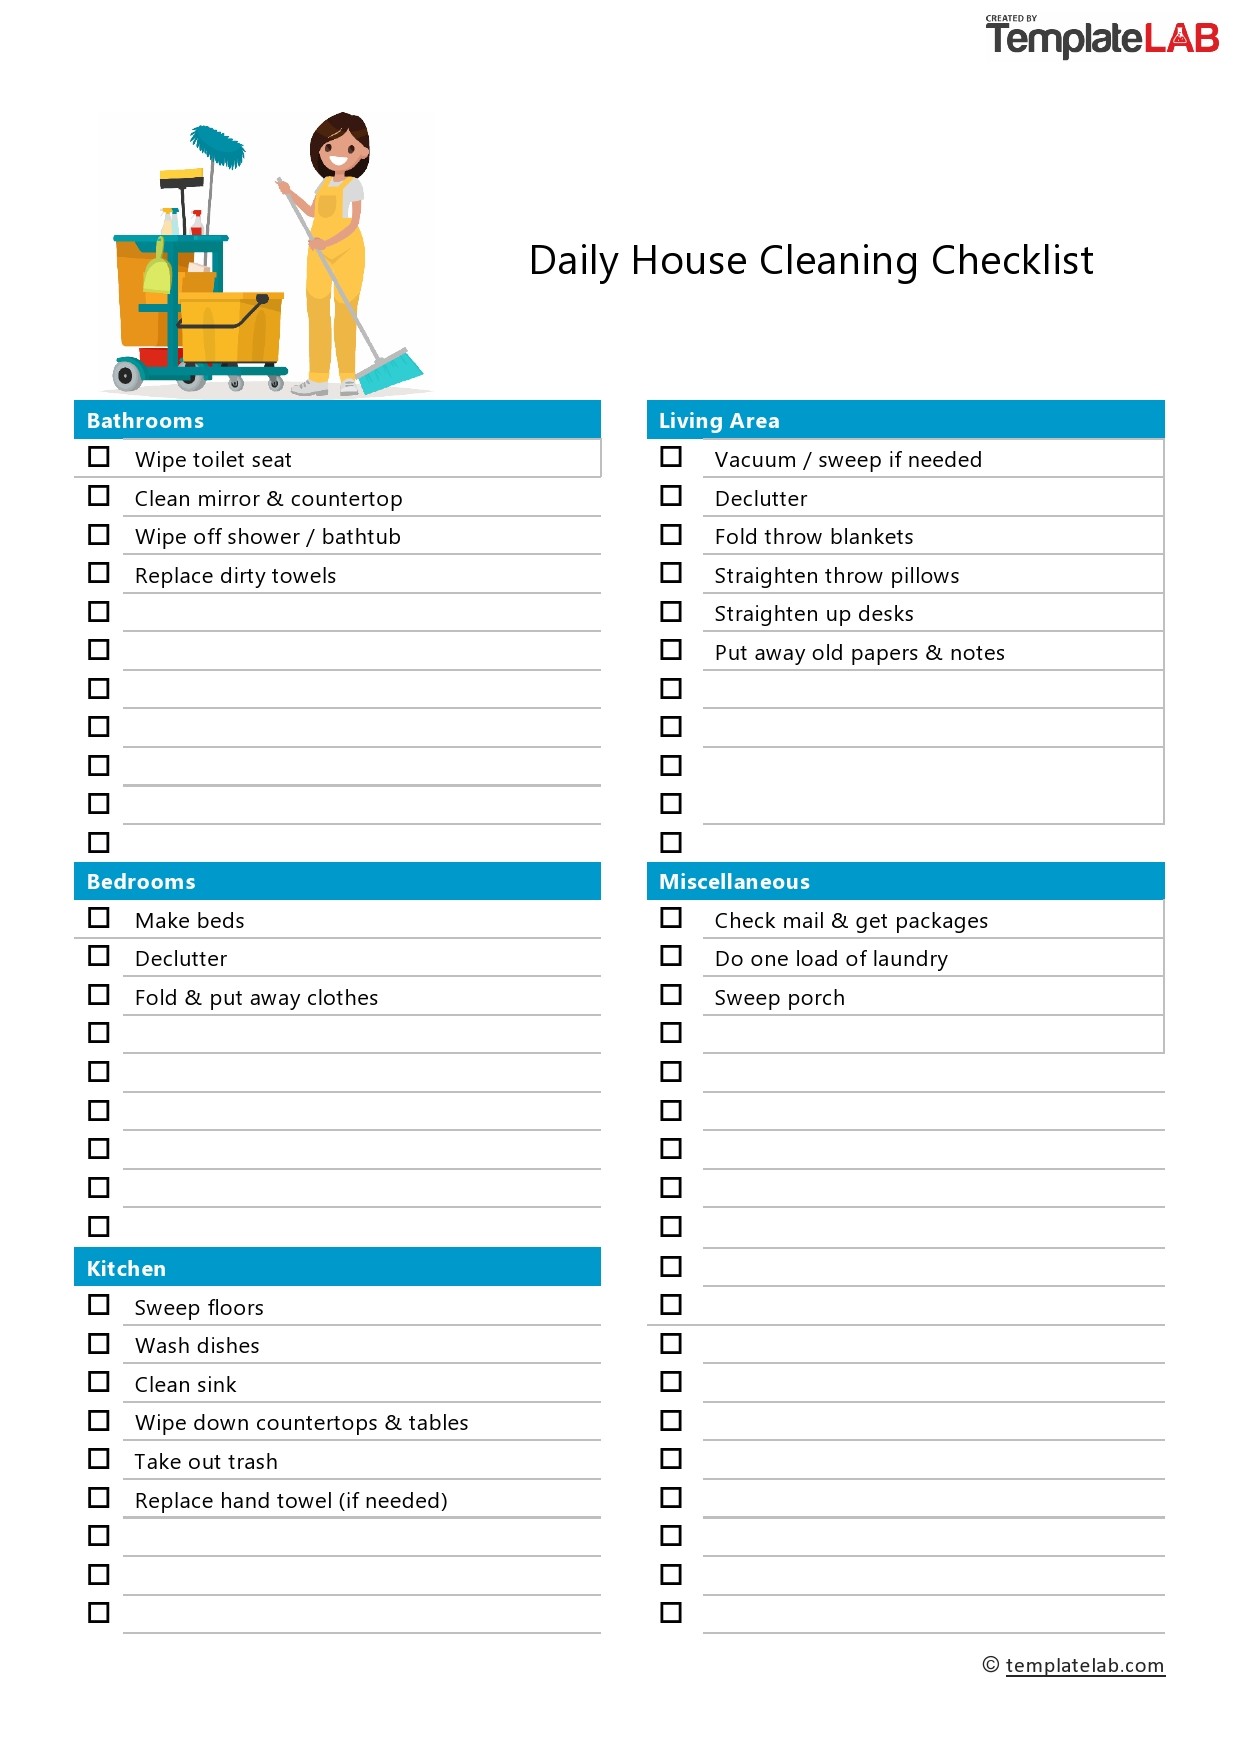 Free Daily House Cleaning Checklist - TemplateLab